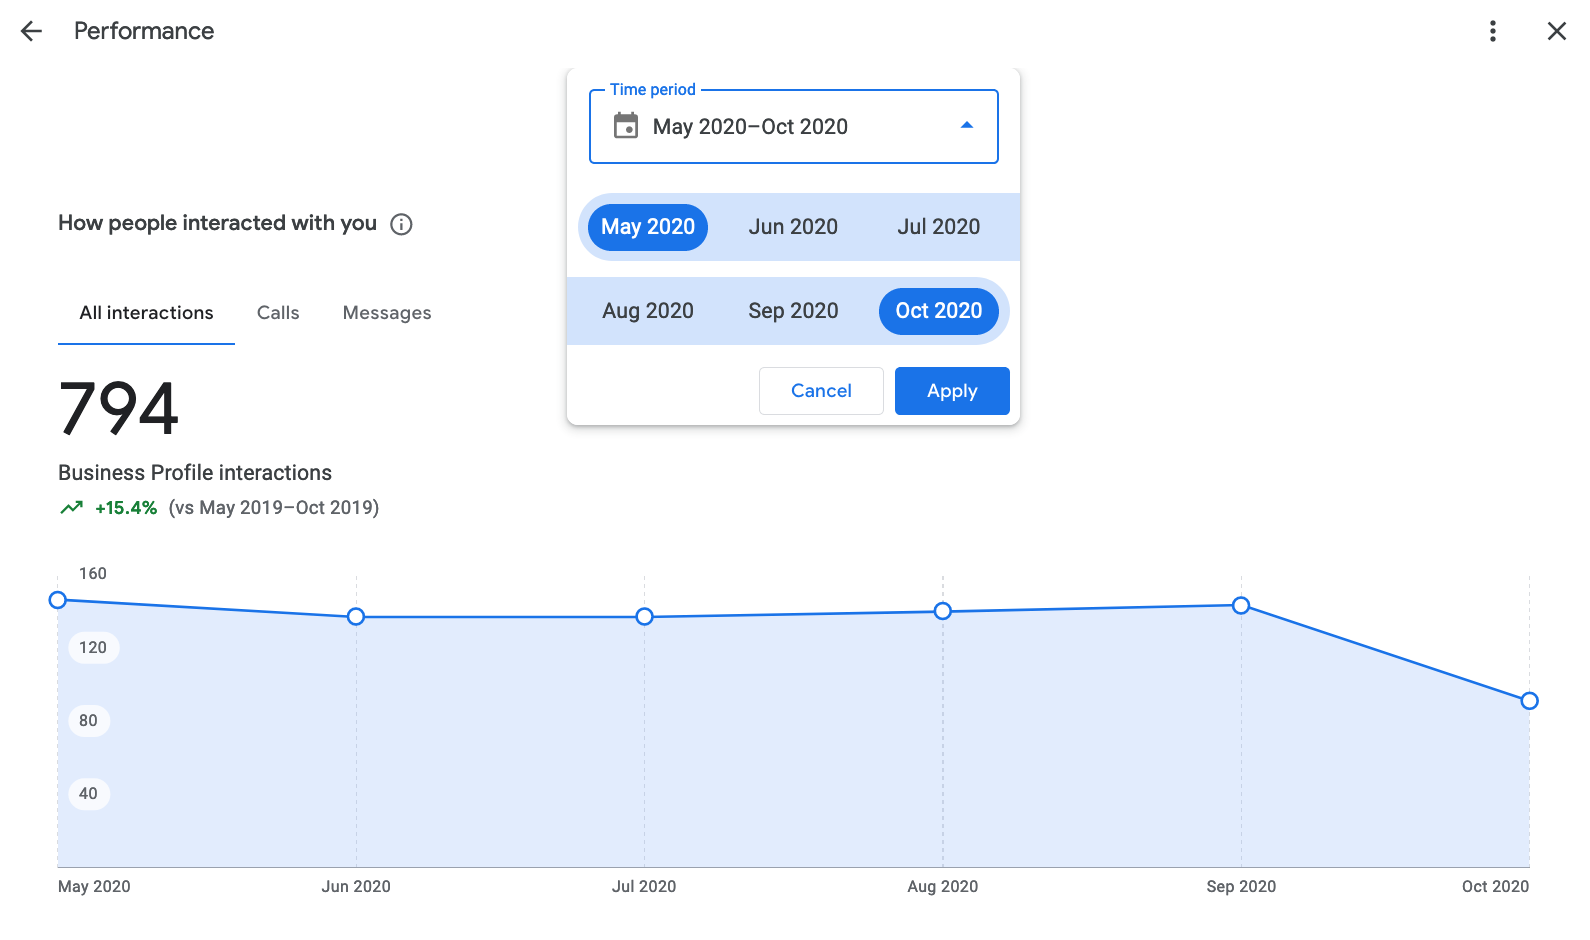 Performance reporting for Google Business listings enables you to see how many people interacted with your listing over a 6-month period.